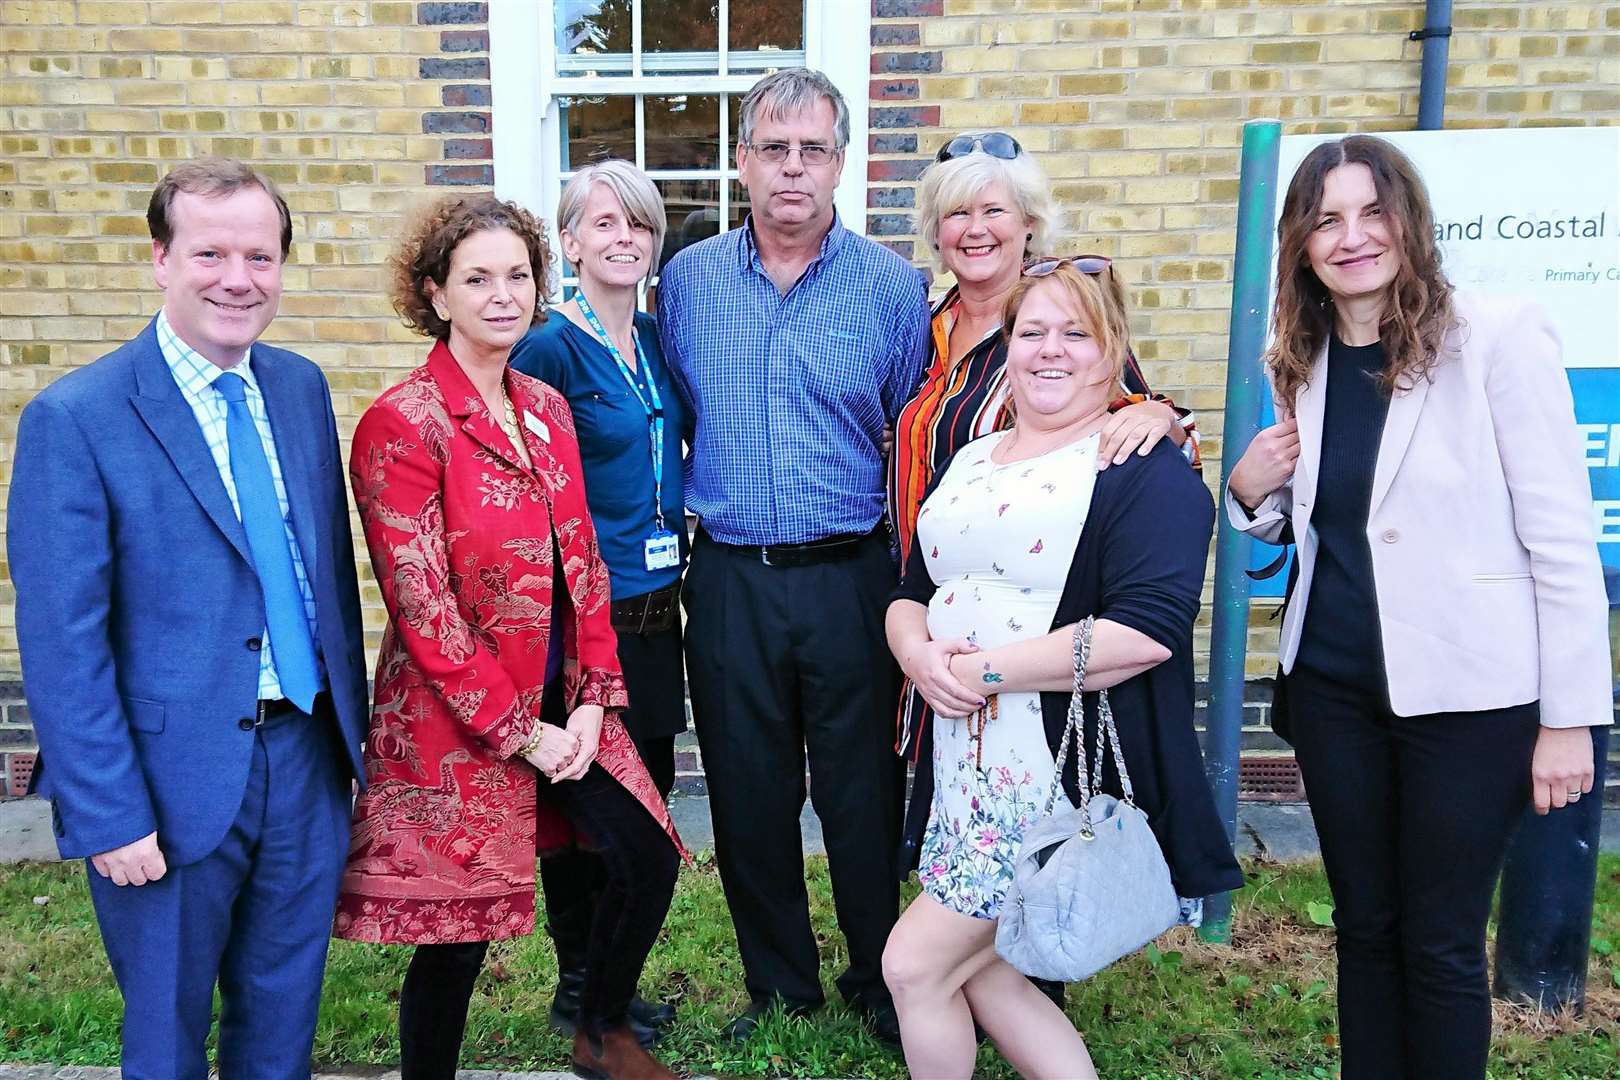 Mr Elphicke with, from left,Helen Greatorex. Kirsten Lawson, Kirk Ross, Tracy Carr, Kelly Ann Evans and Karen Benbow at Deal Mental Health Centre. Picture: Office of Charlie Elphicke MP